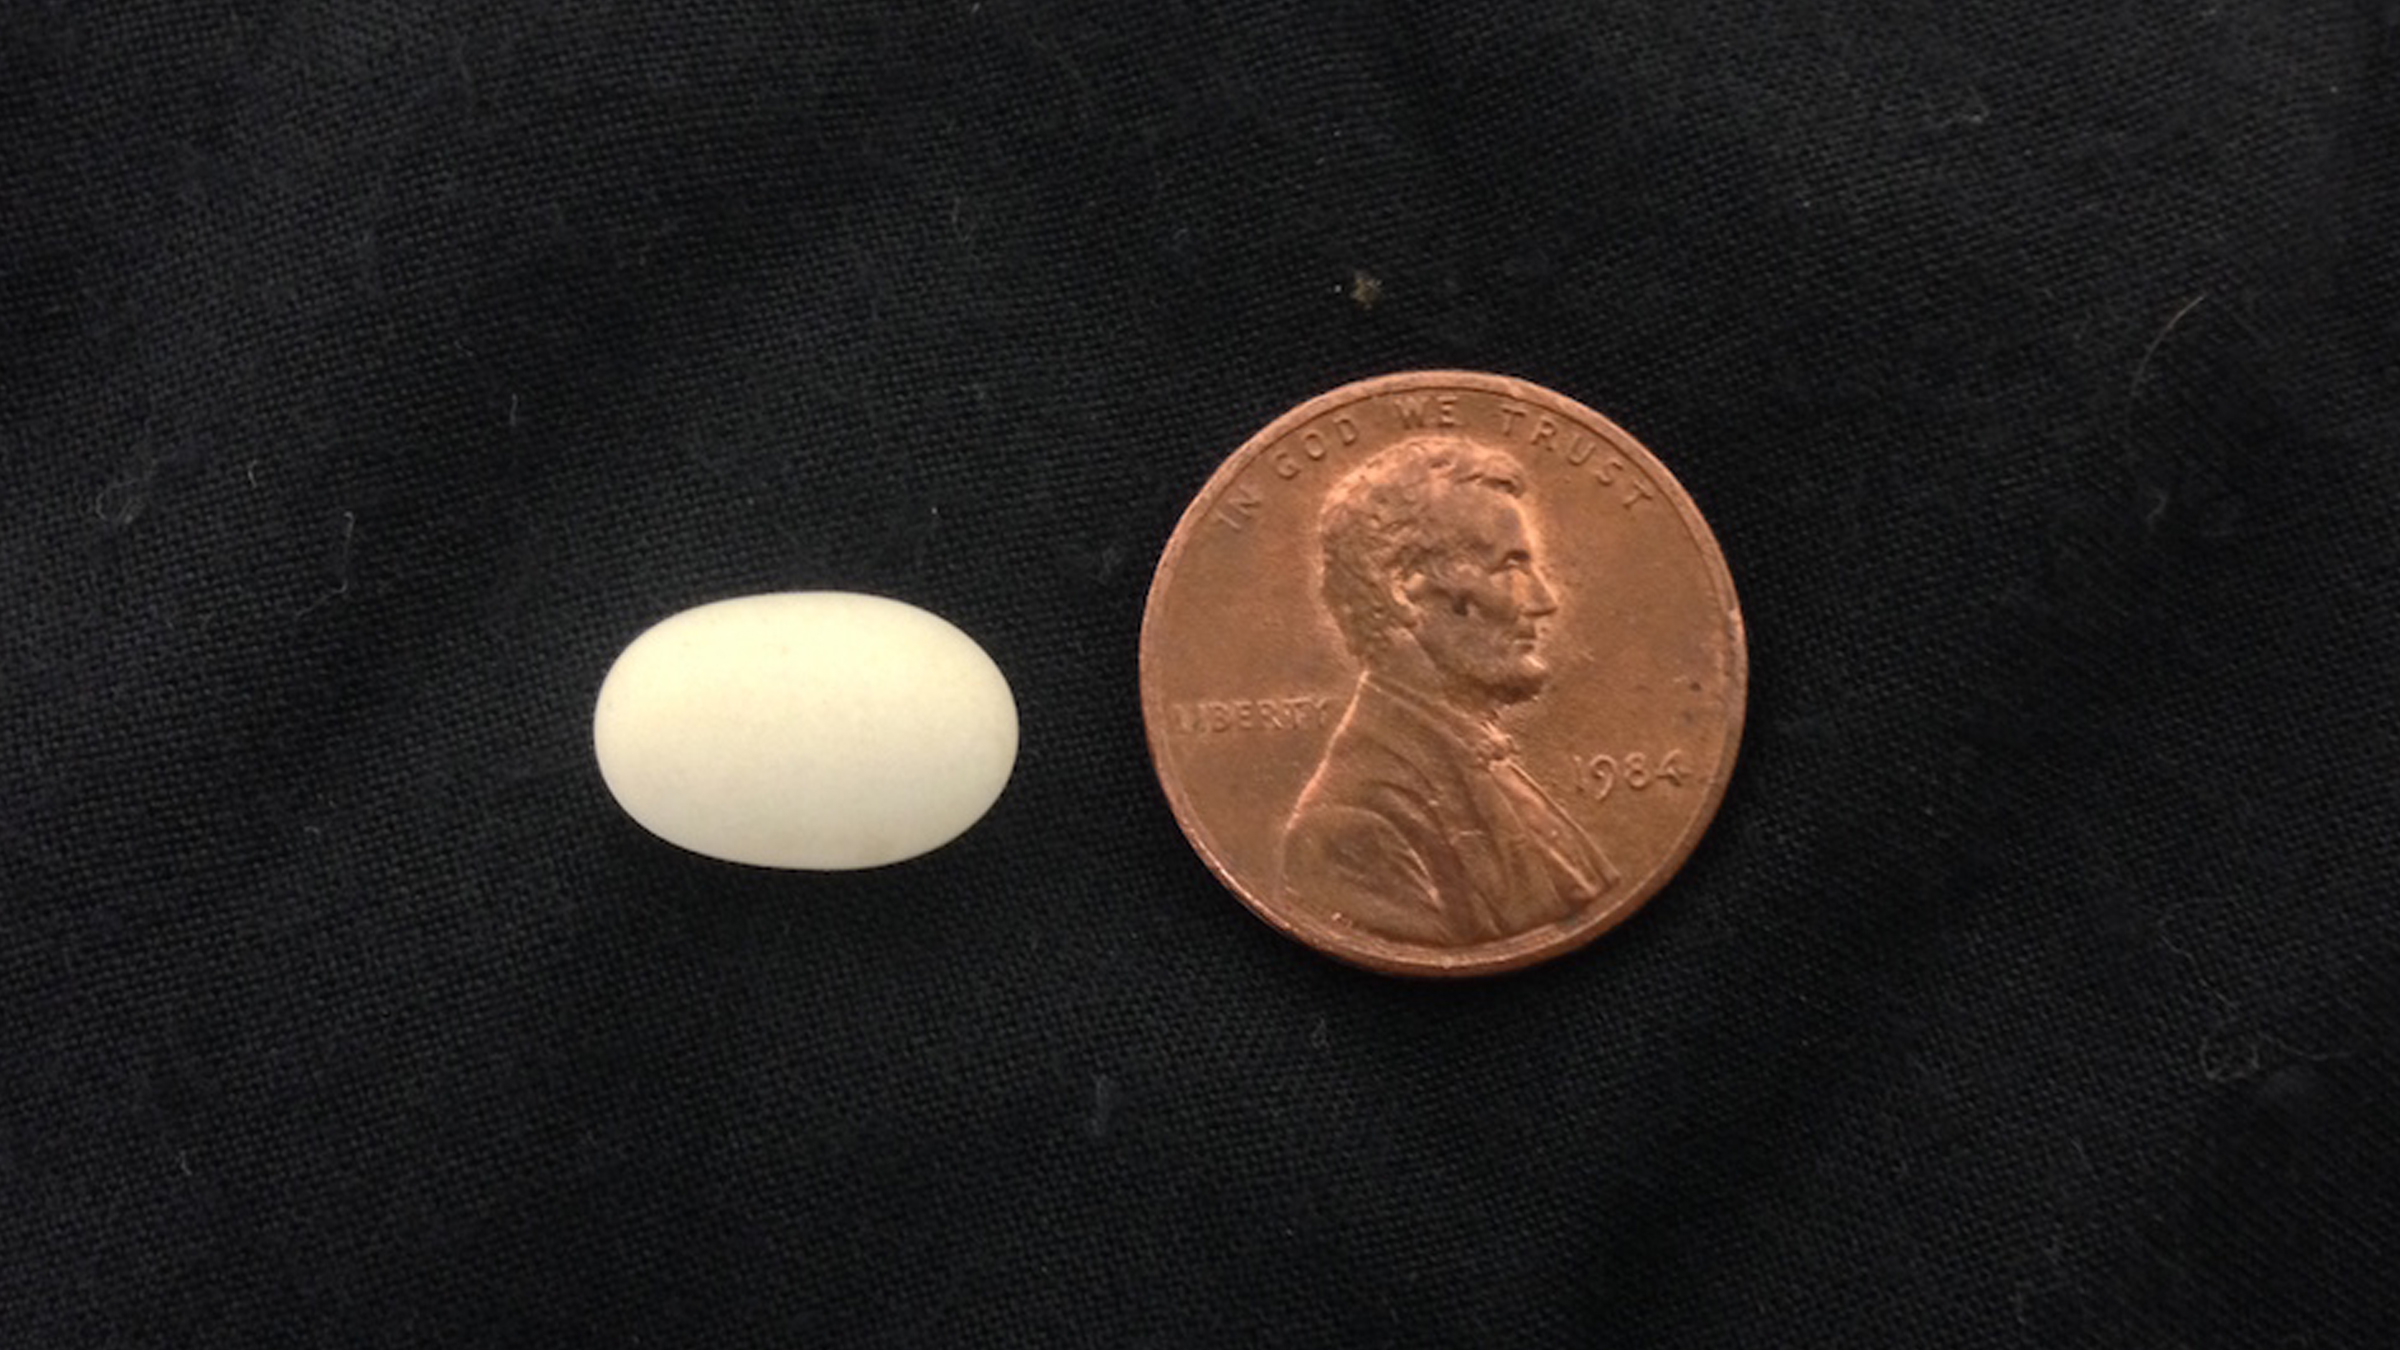 Here we see a small oval egg that is smaller than the penny next to it against a black background.